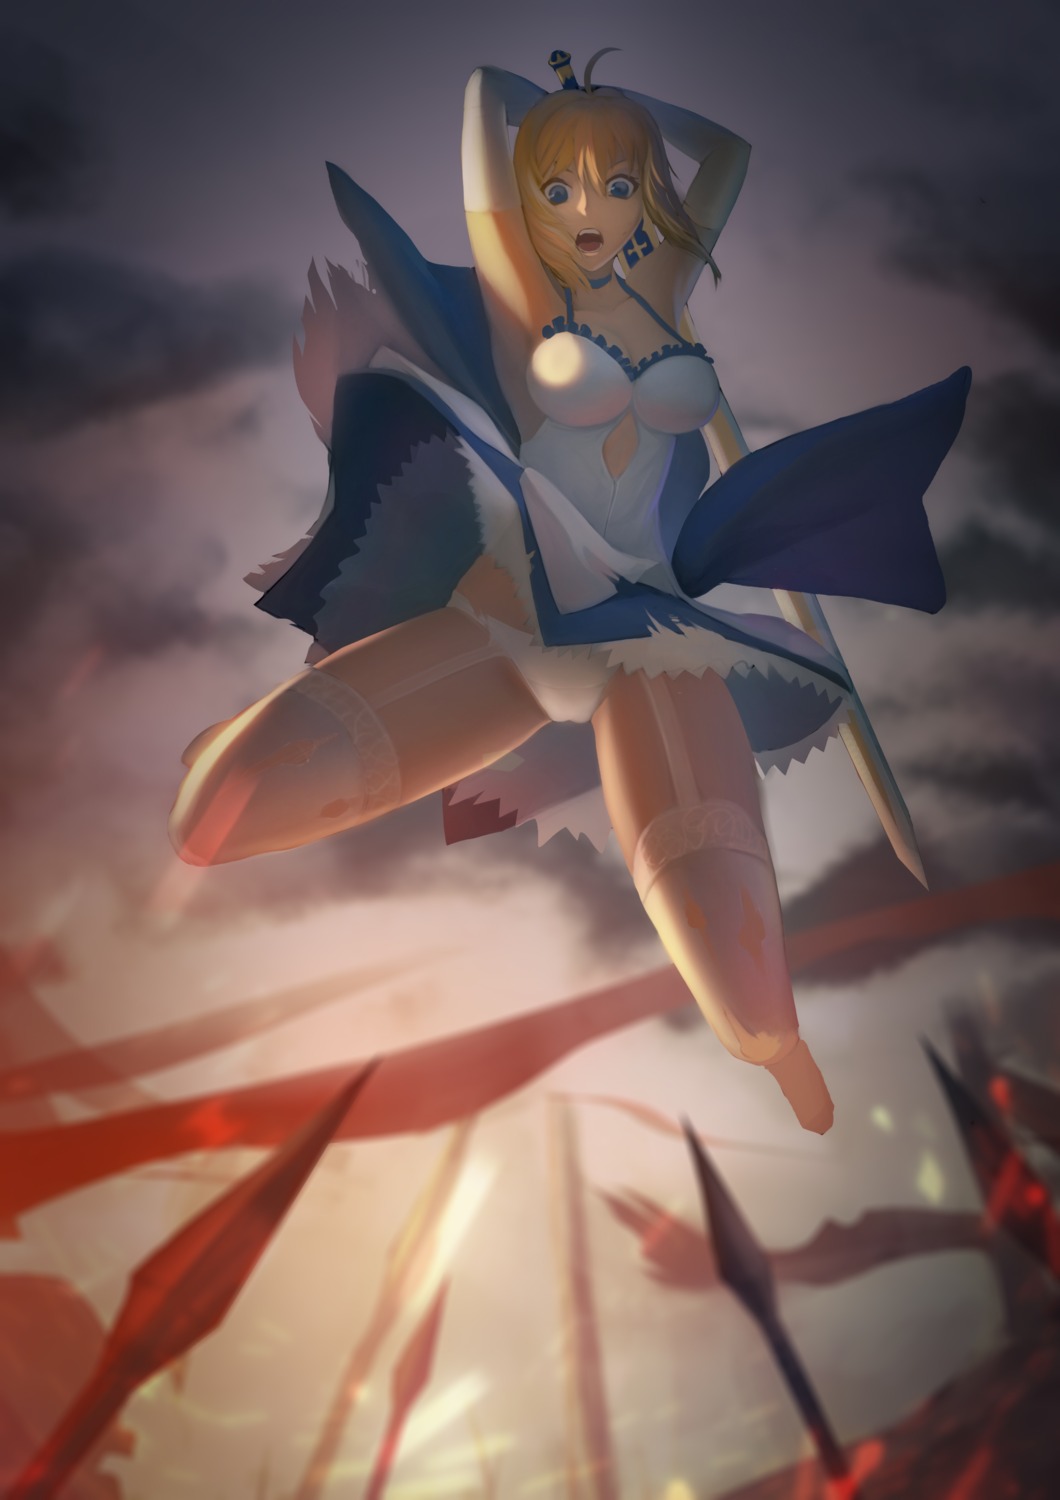 baliu cameltoe cleavage dress fate/stay_night fate/stay_night_unlimited_blade_works no_bra pantsu saber skirt_lift stockings sword thighhighs torn_clothes weapon